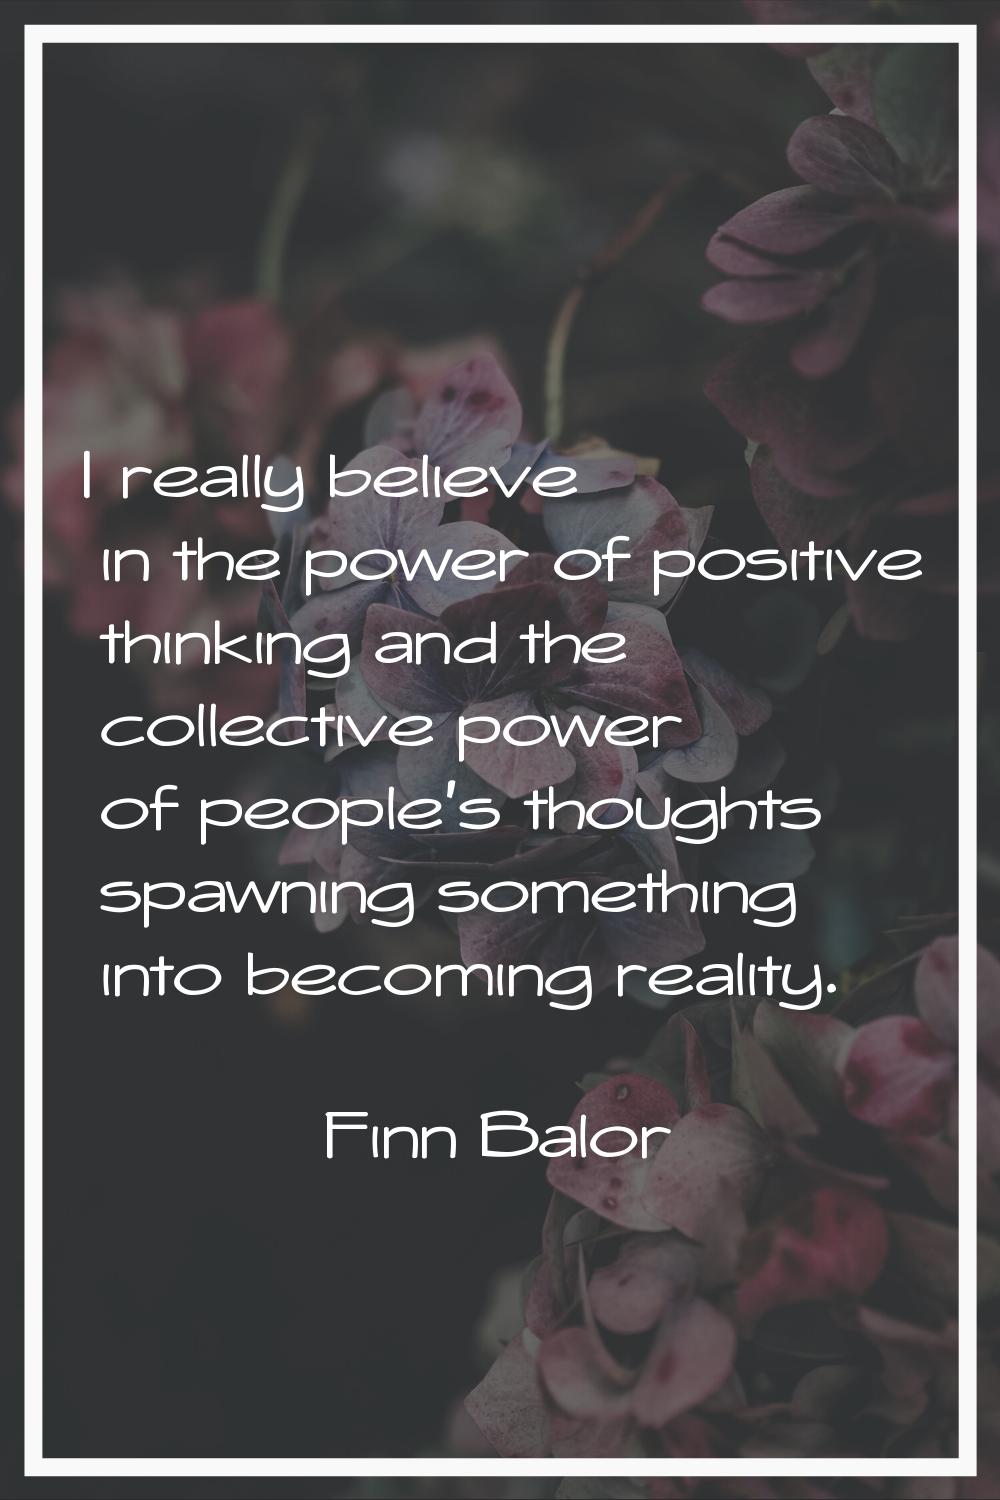 I really believe in the power of positive thinking and the collective power of people's thoughts sp